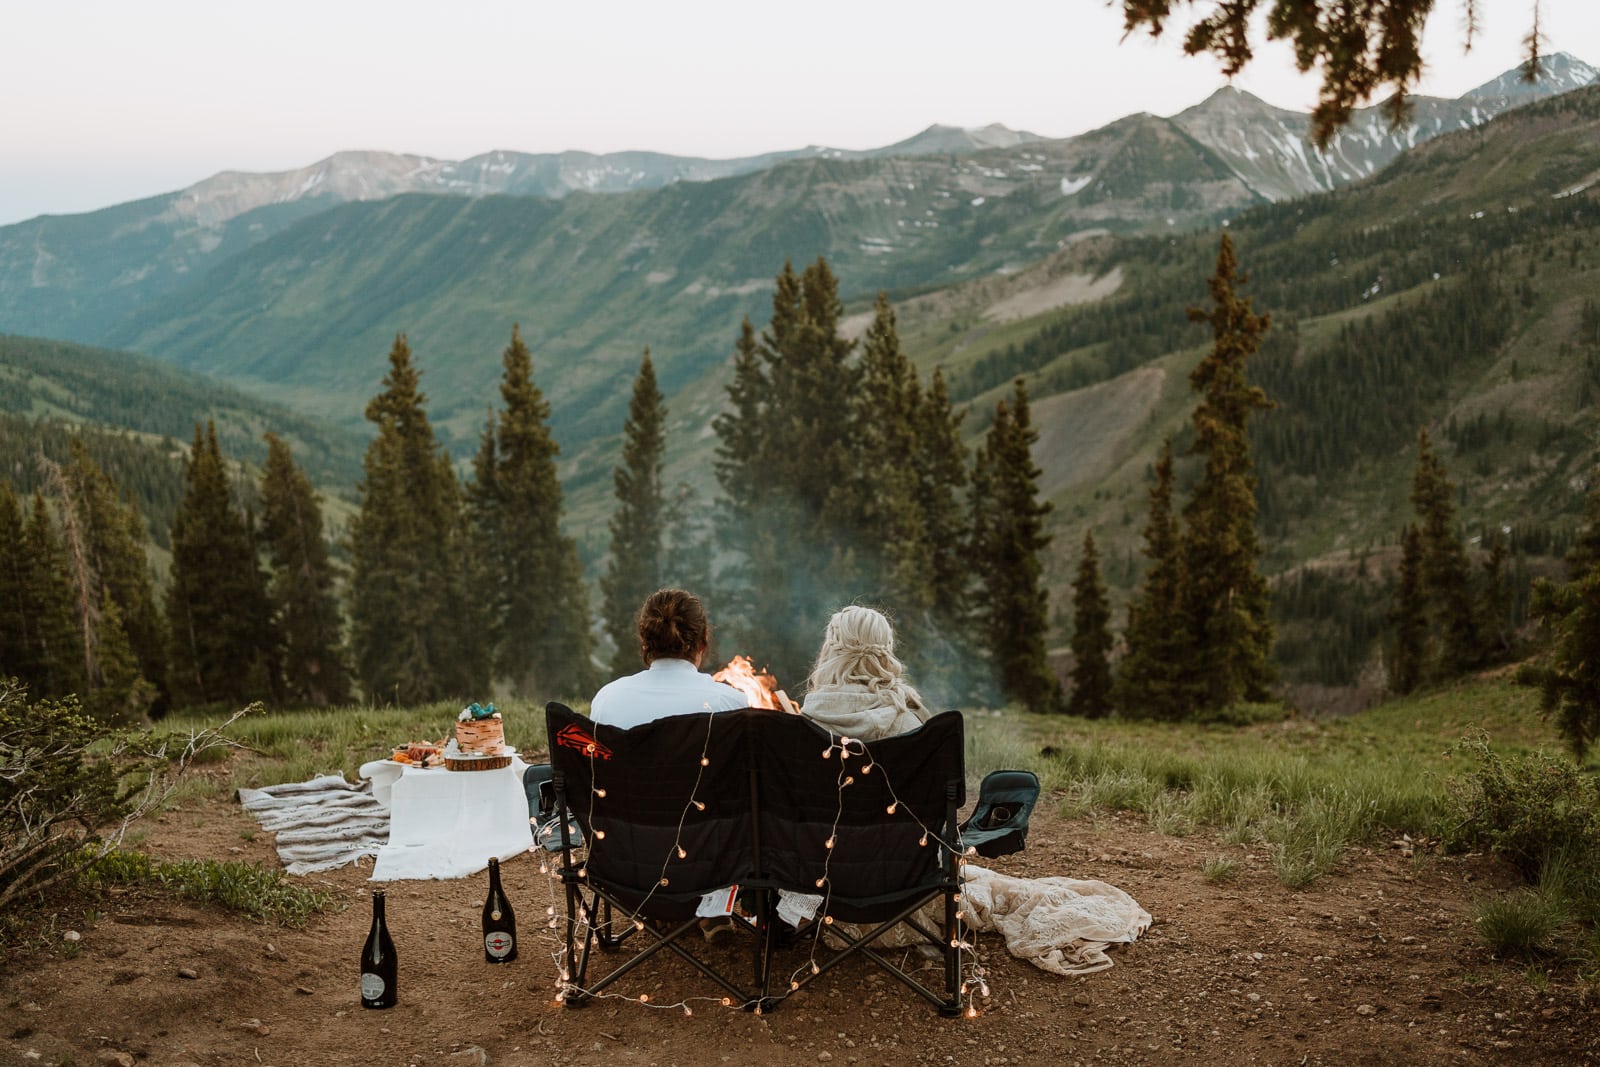 Amber & Jason took a Jeep to this beautiful overlook near Crested Butte. The two of them sat in a chair next to a campfire and enjoyed the mountain views. One of the best places to elope if you can off-road!